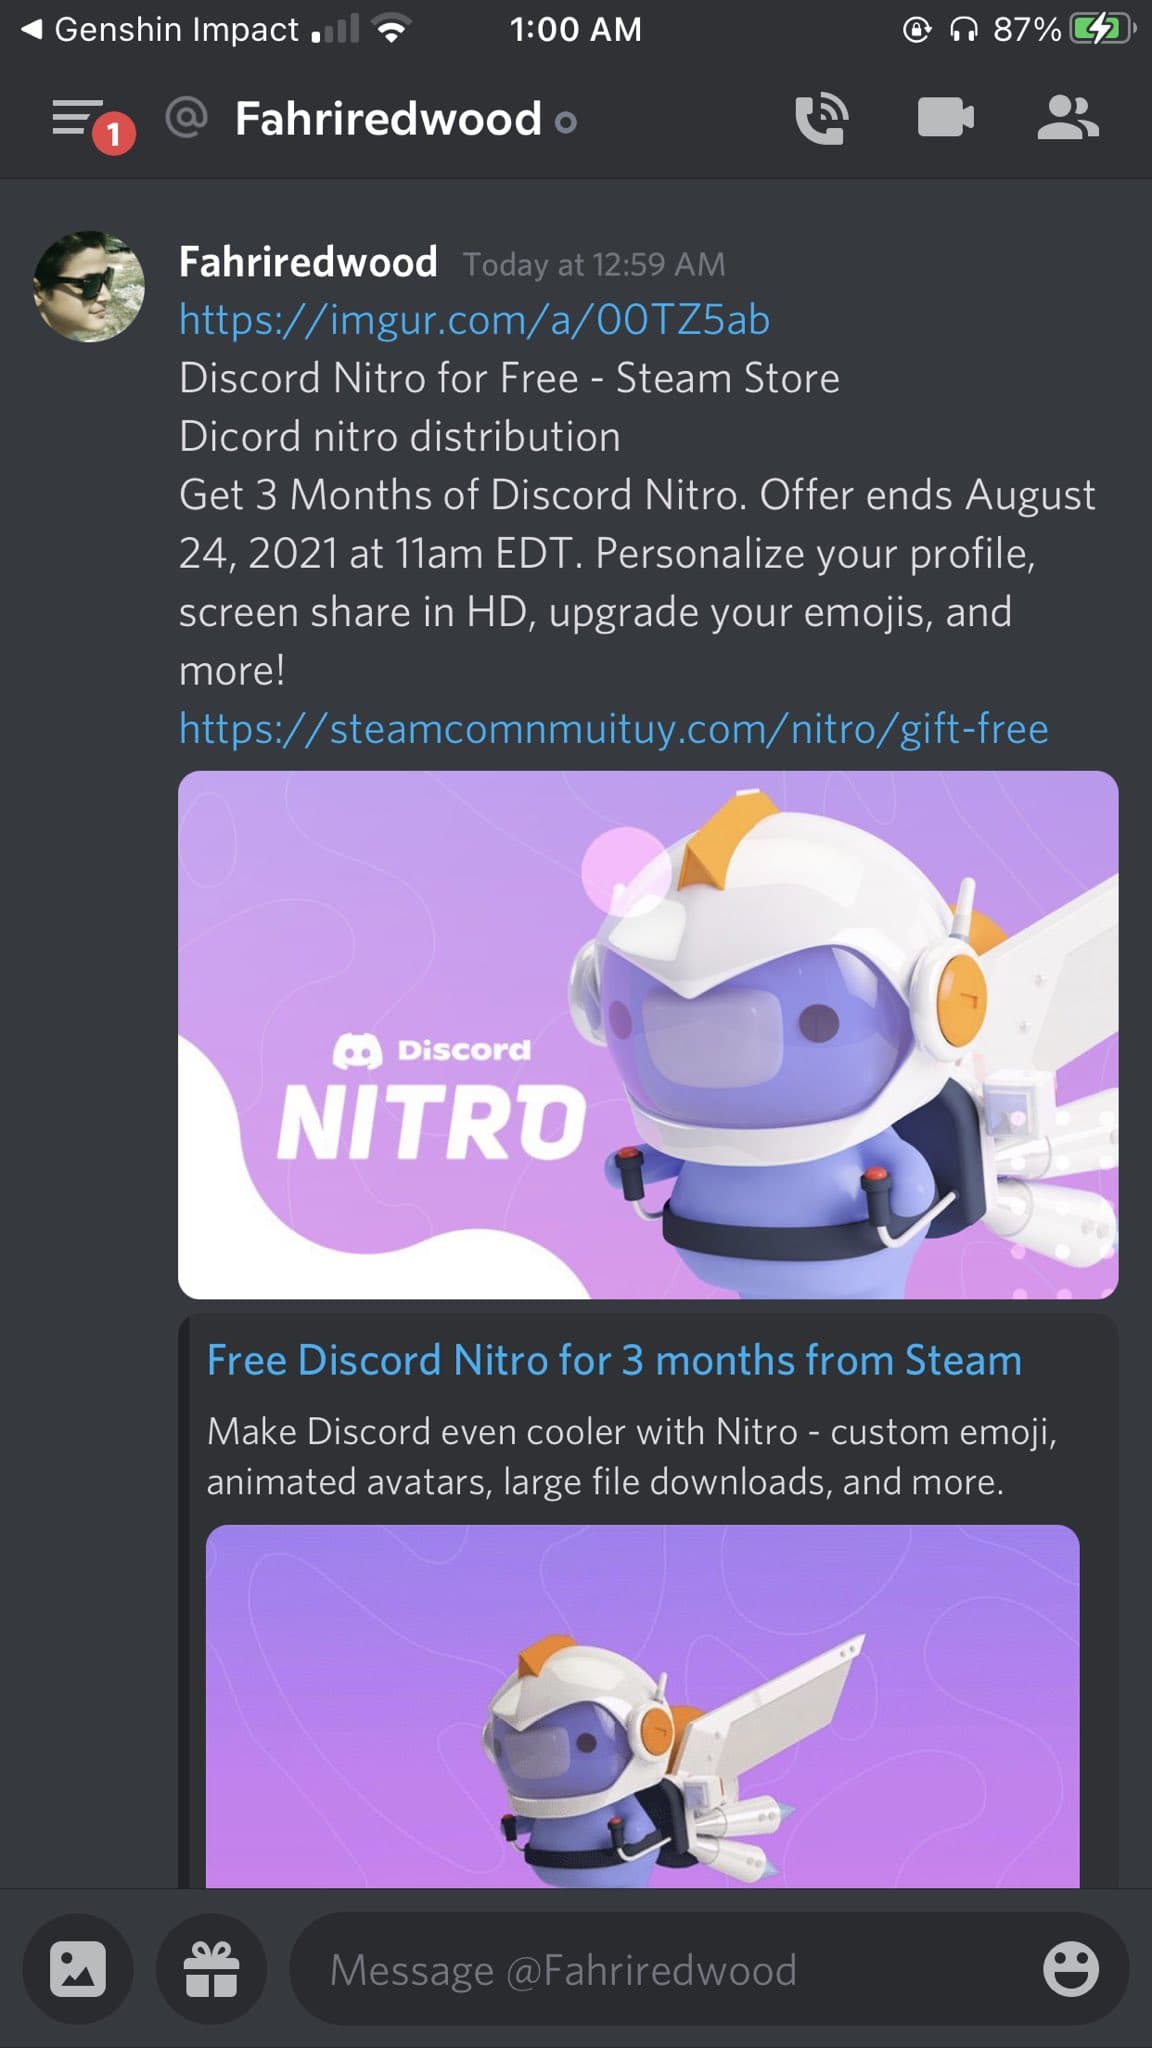 can you play discord nitro games with steam people